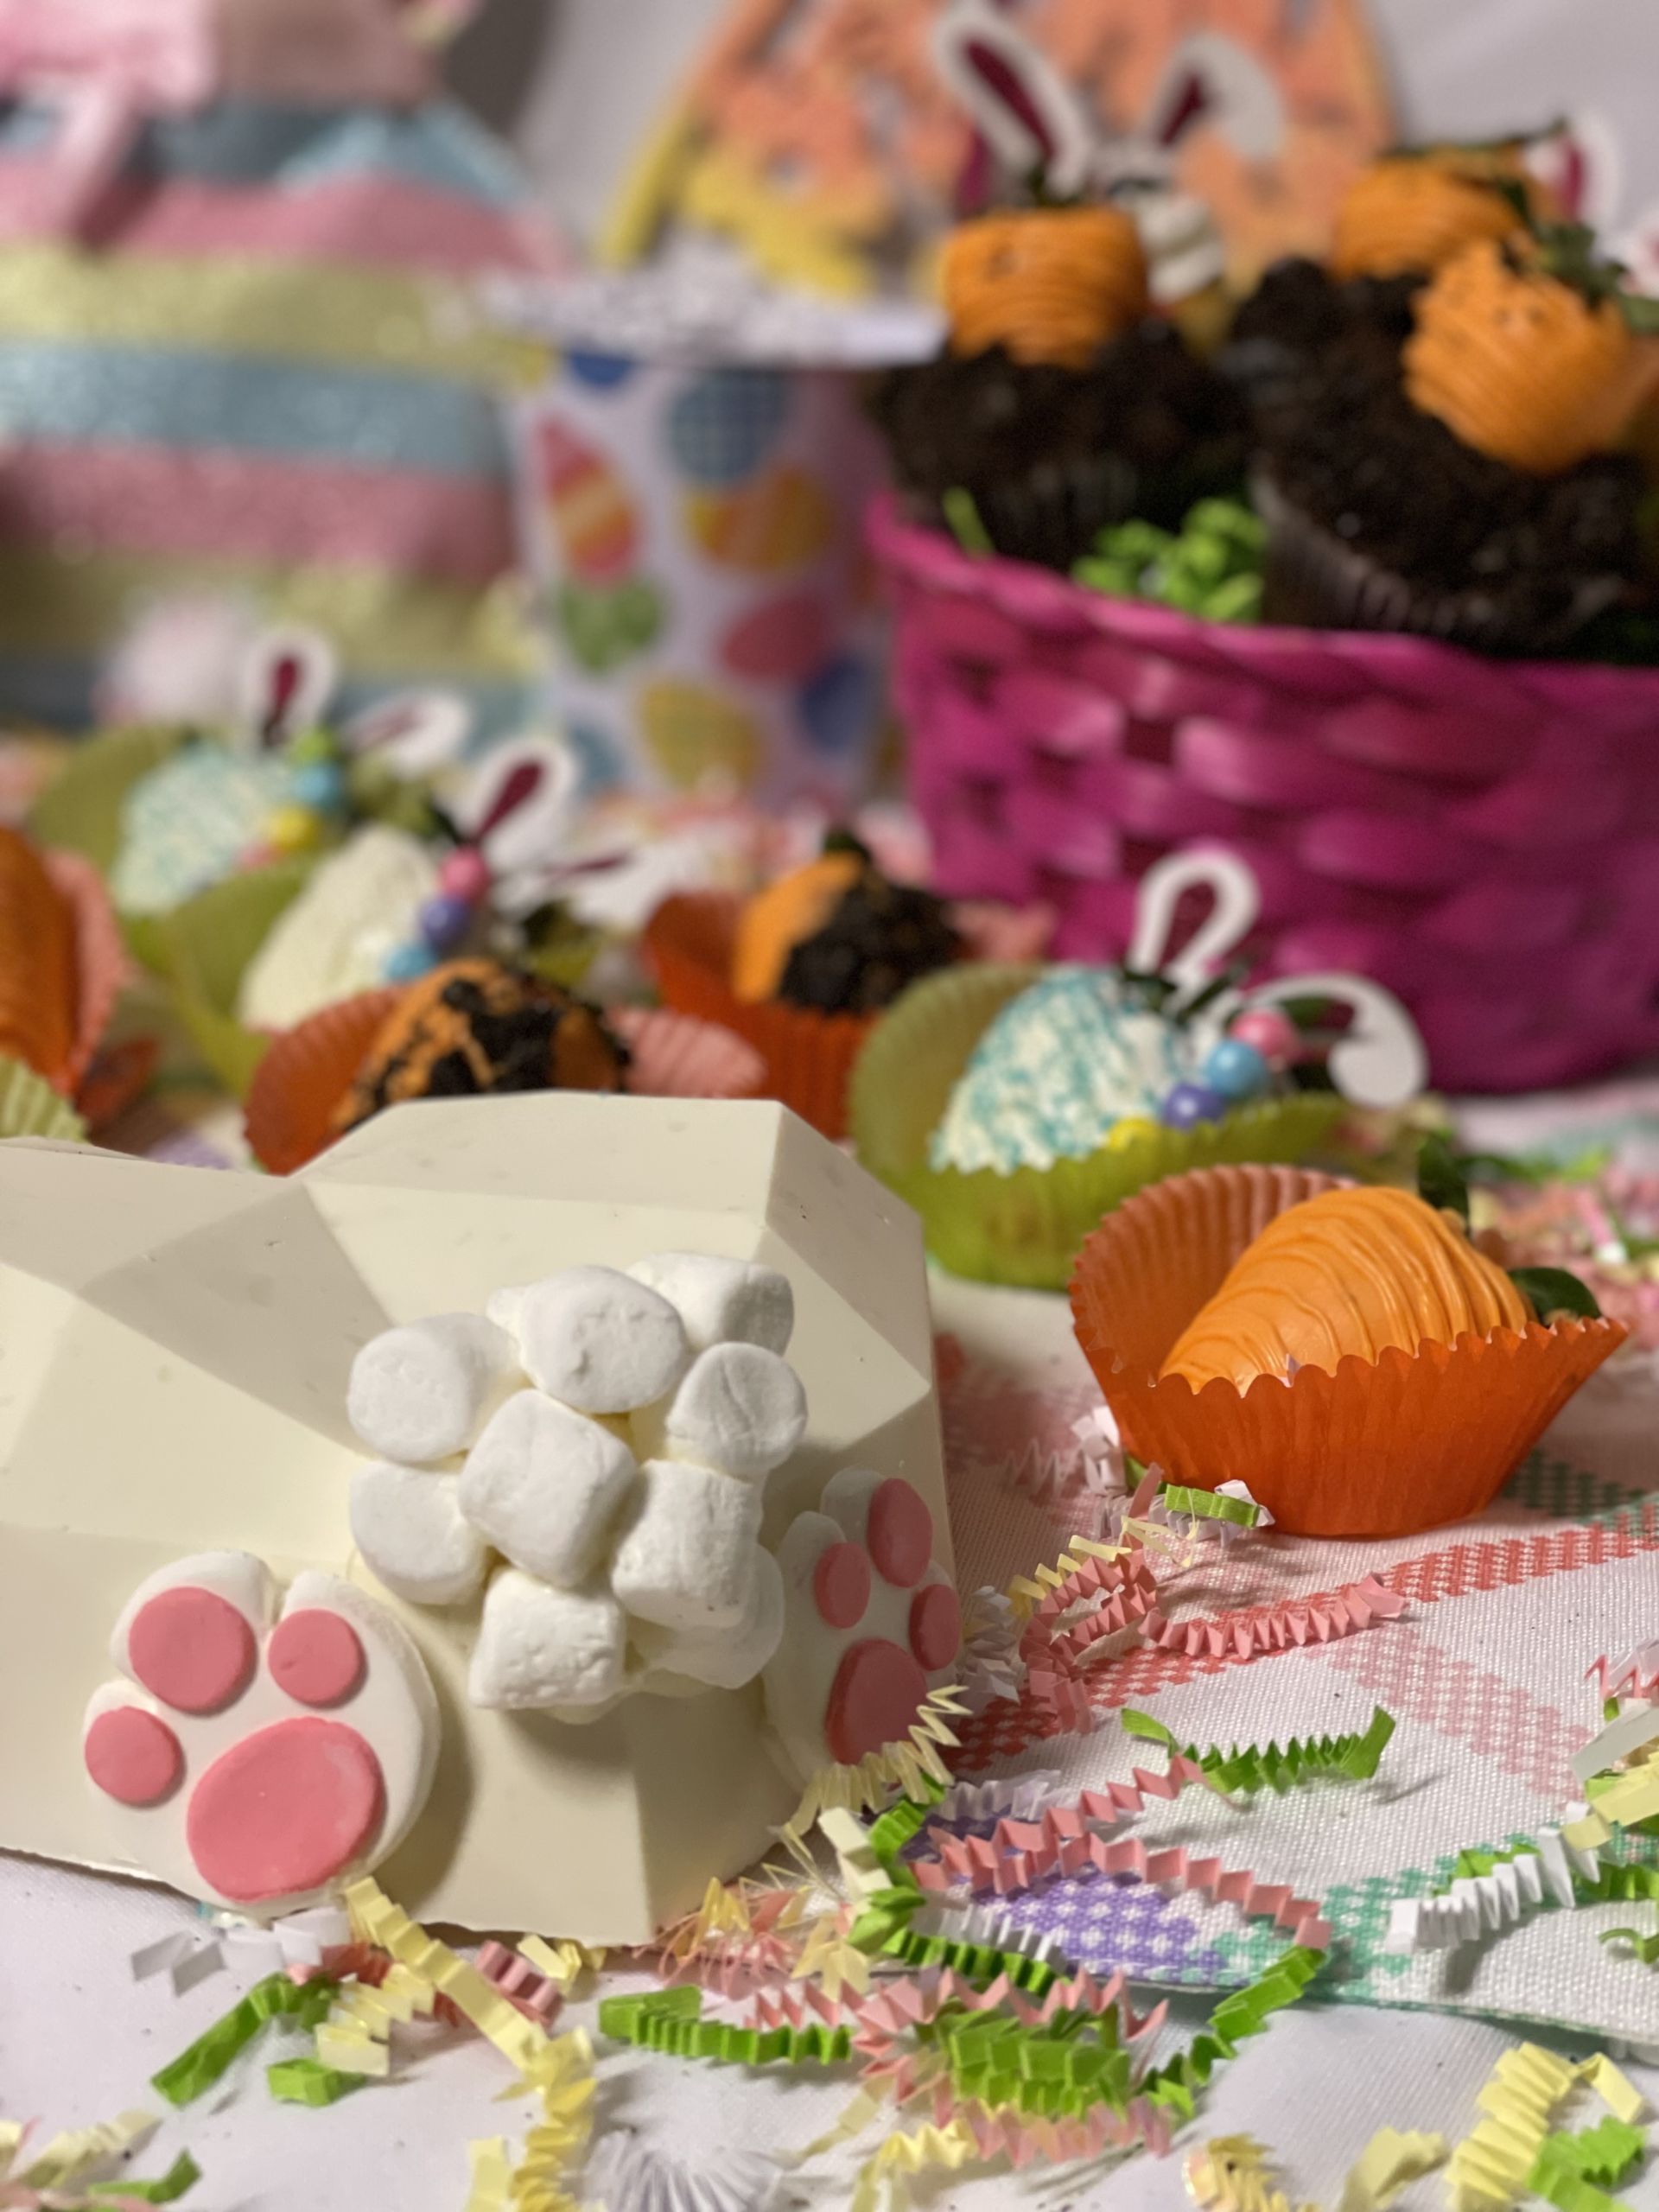 A photo of assorted Easter decorations with chocolate covered strawberries